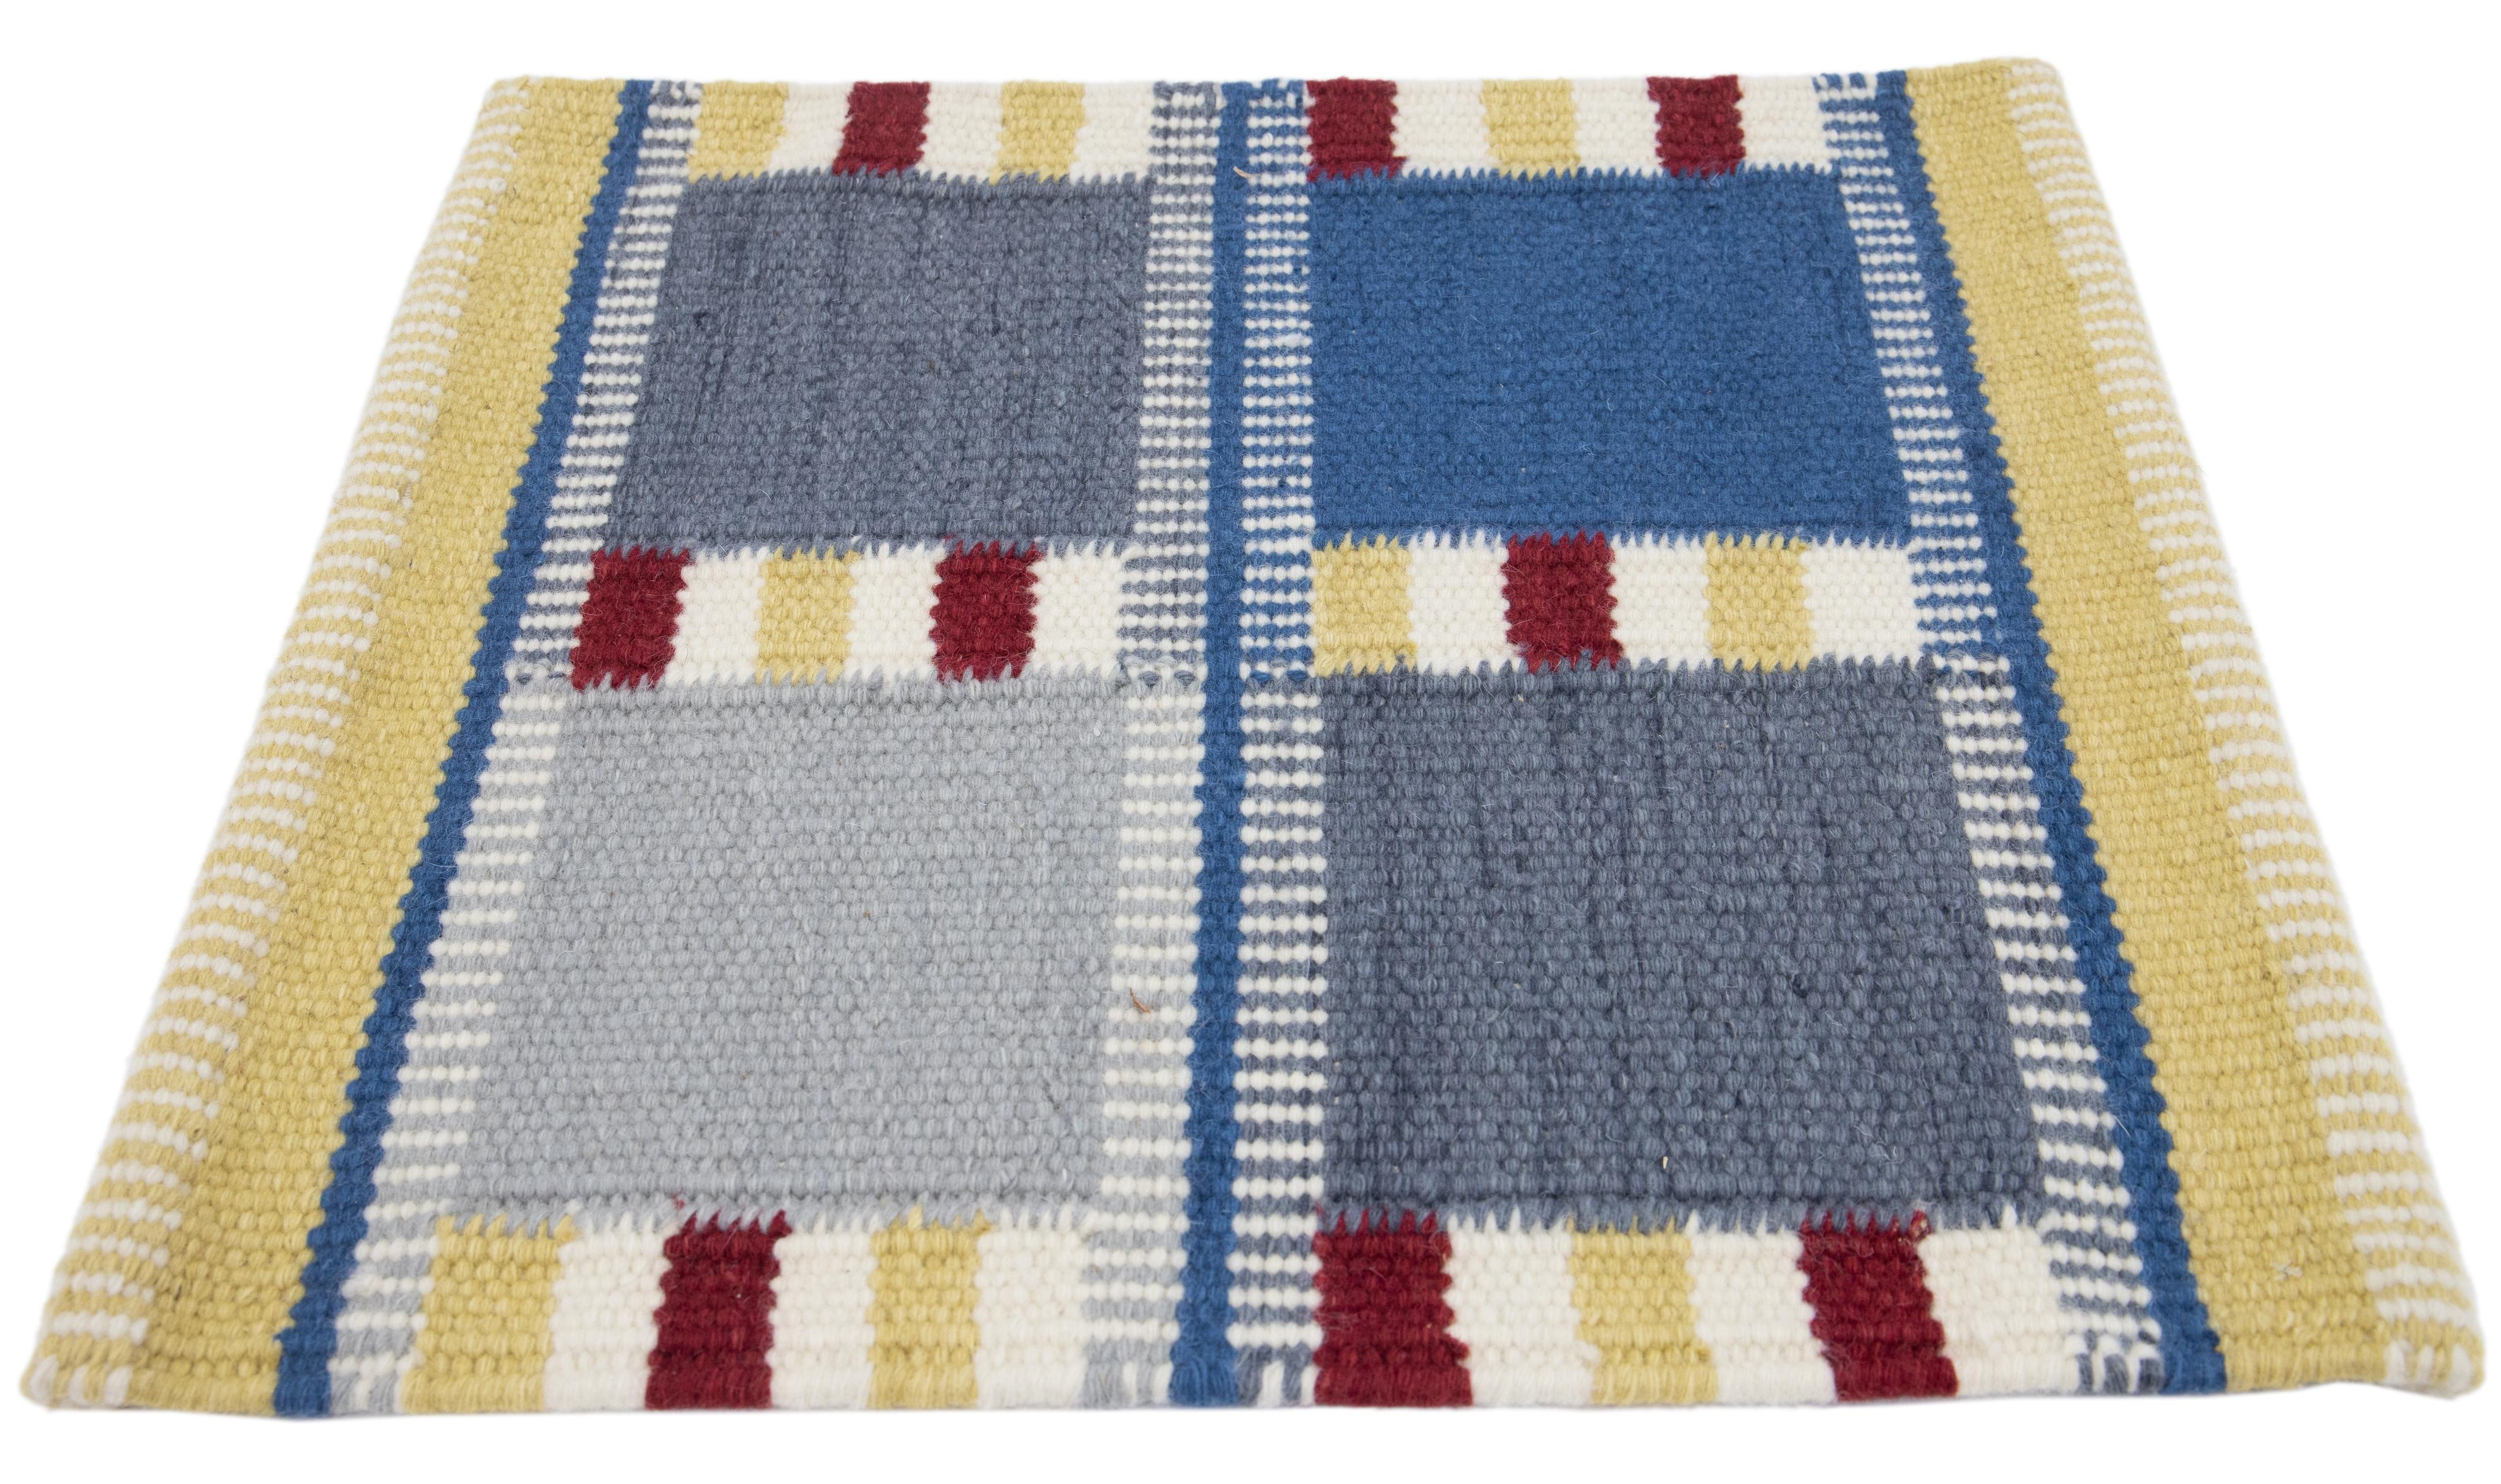 Apadana's Modern Swedish Style handwoven wool custom rug. Custom sizes and colors made-to-order. 

Material: Wool 
Techniques: Hand-Woven
Style: Swedish
Lead time: Approx. 15-16 wks available 
Colors: As shown, other custom colors are